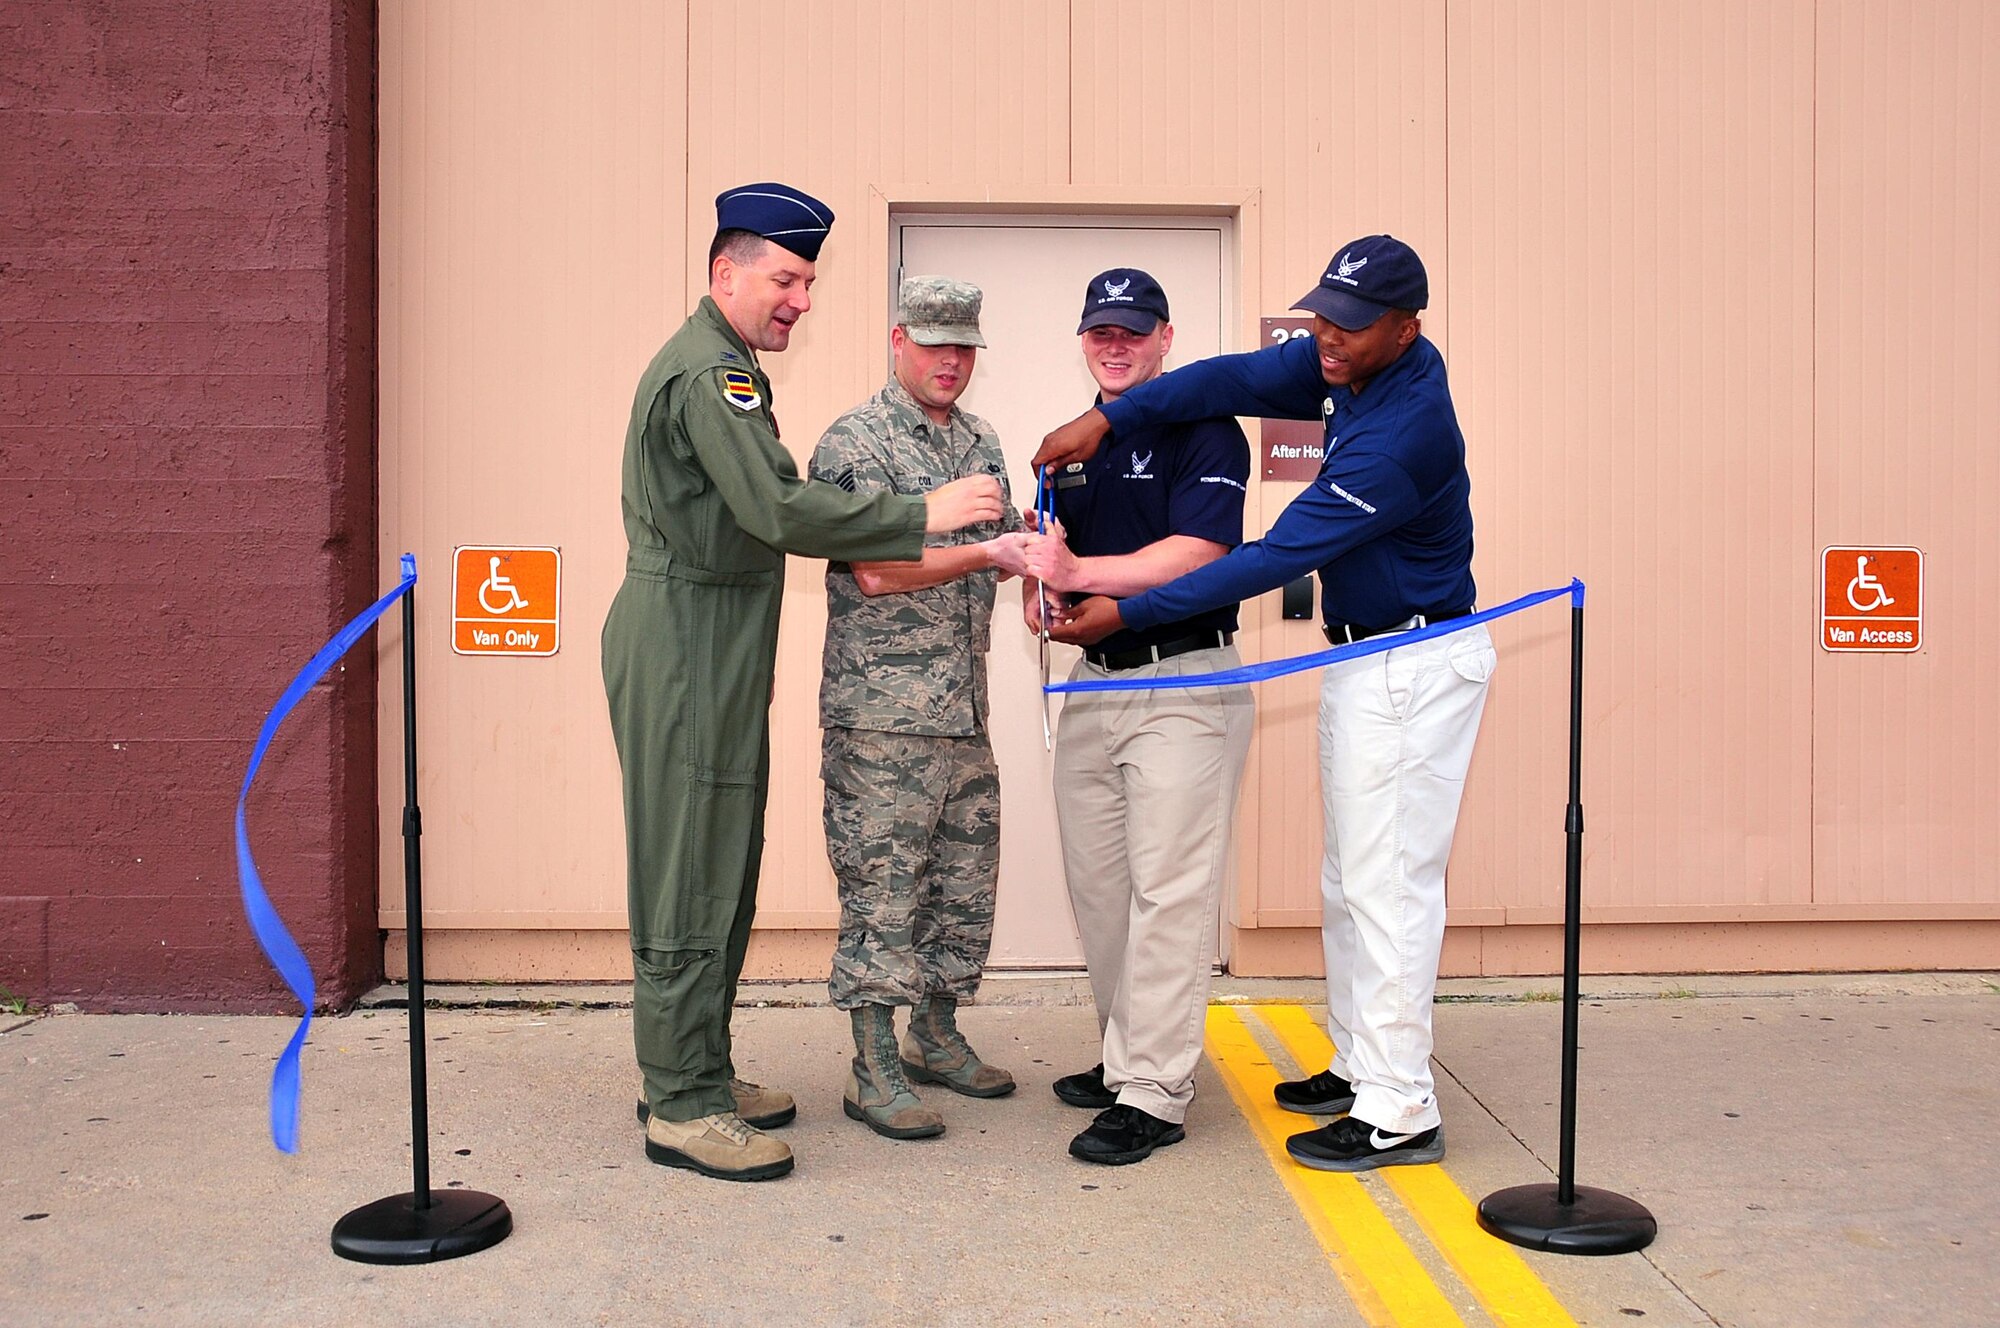 U.S. Air Force Col. Marty Reynolds, commander of the 55th Wing, joins Offutt Field House staff members in cutting the ribbon to the new after-hours facility at Offutt Air Force Base, Neb., July 7, 2016.  The 1,000 square foot corner of the Department of Defense’s largest fitness facility will provide access to fitness equipment for swing shift members of Team Offutt.  (U.S. Air Force photo by D.P. Heard/Released)